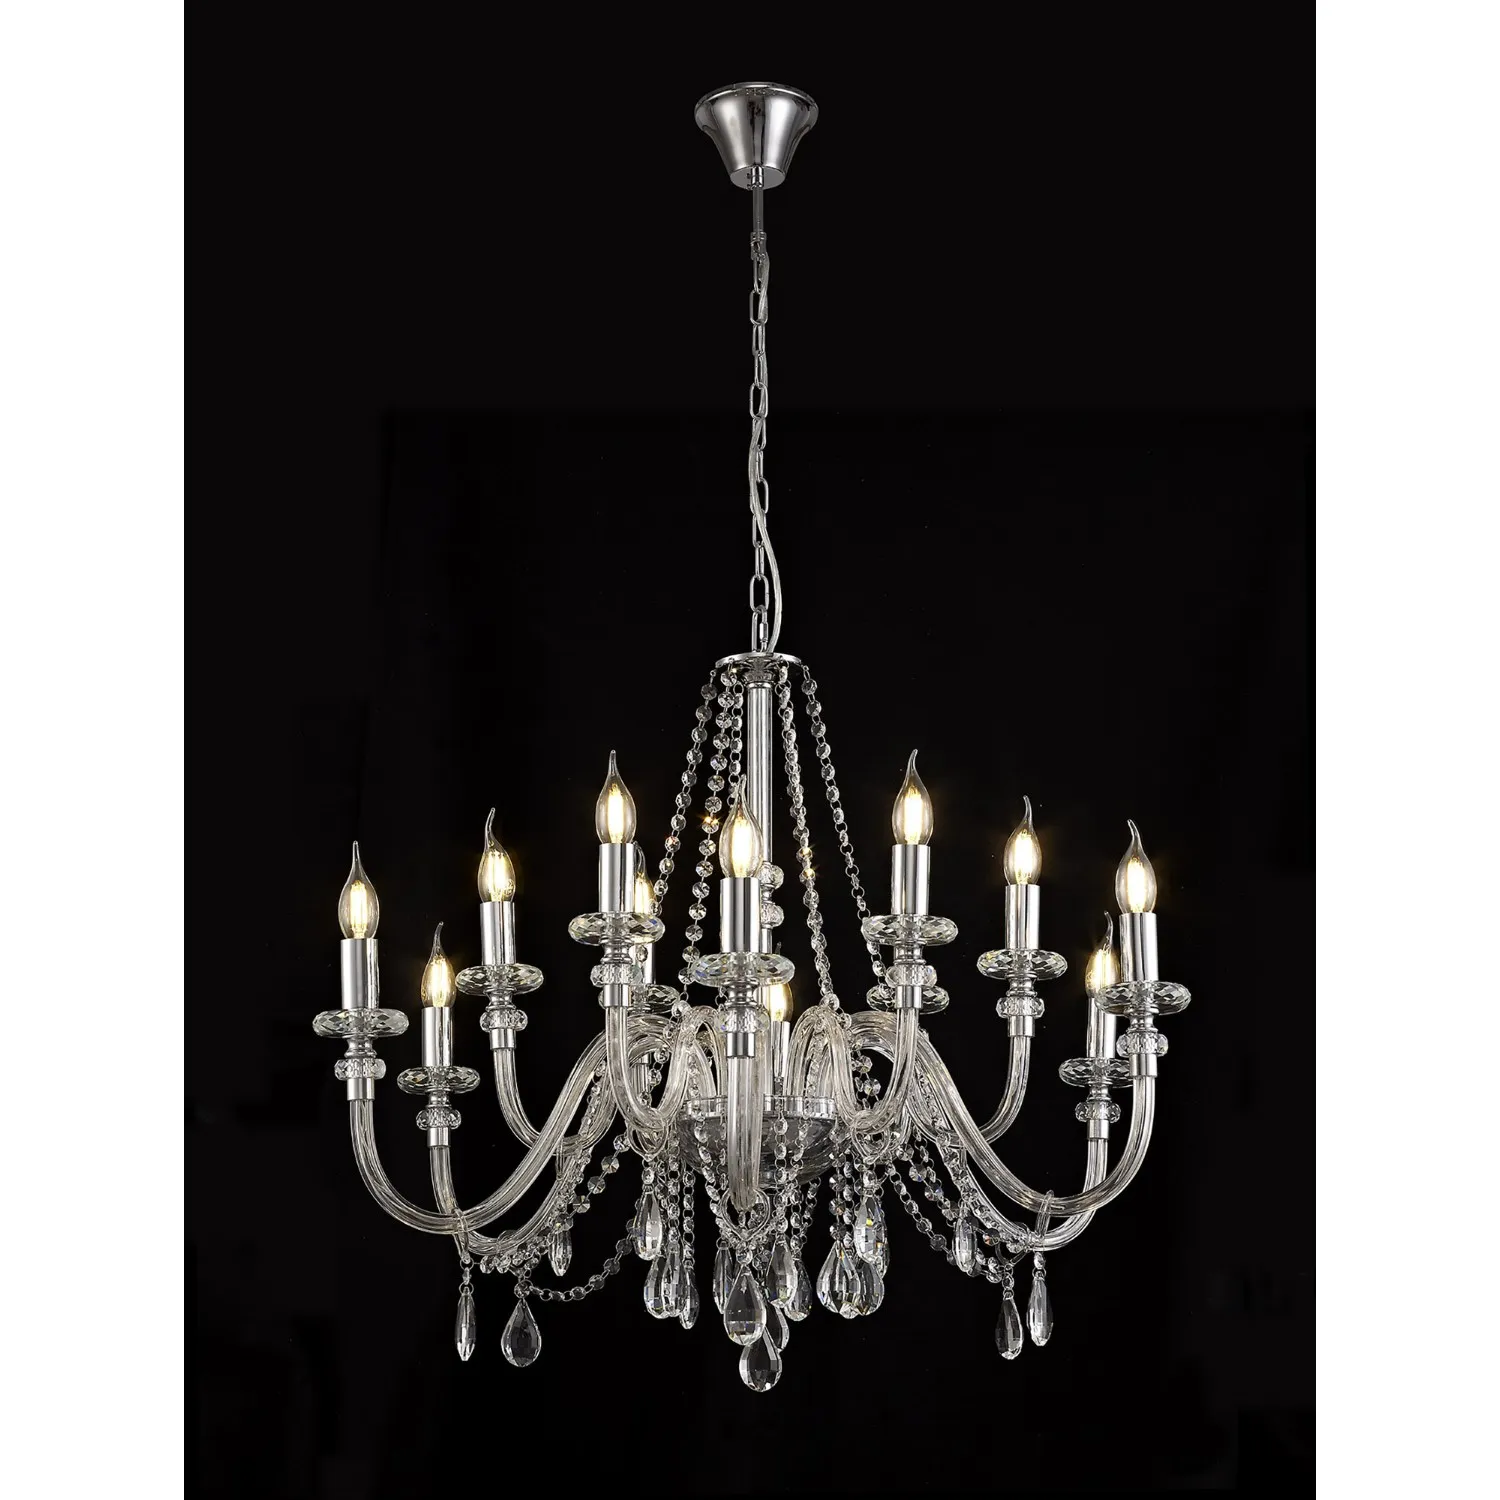 Wimbledon Chandelier Pendant, 12 Light E14, Polished Chrome Clear Glass Crystal, (ITEM REQUIRES CONSTRUCTION CONNECTION)